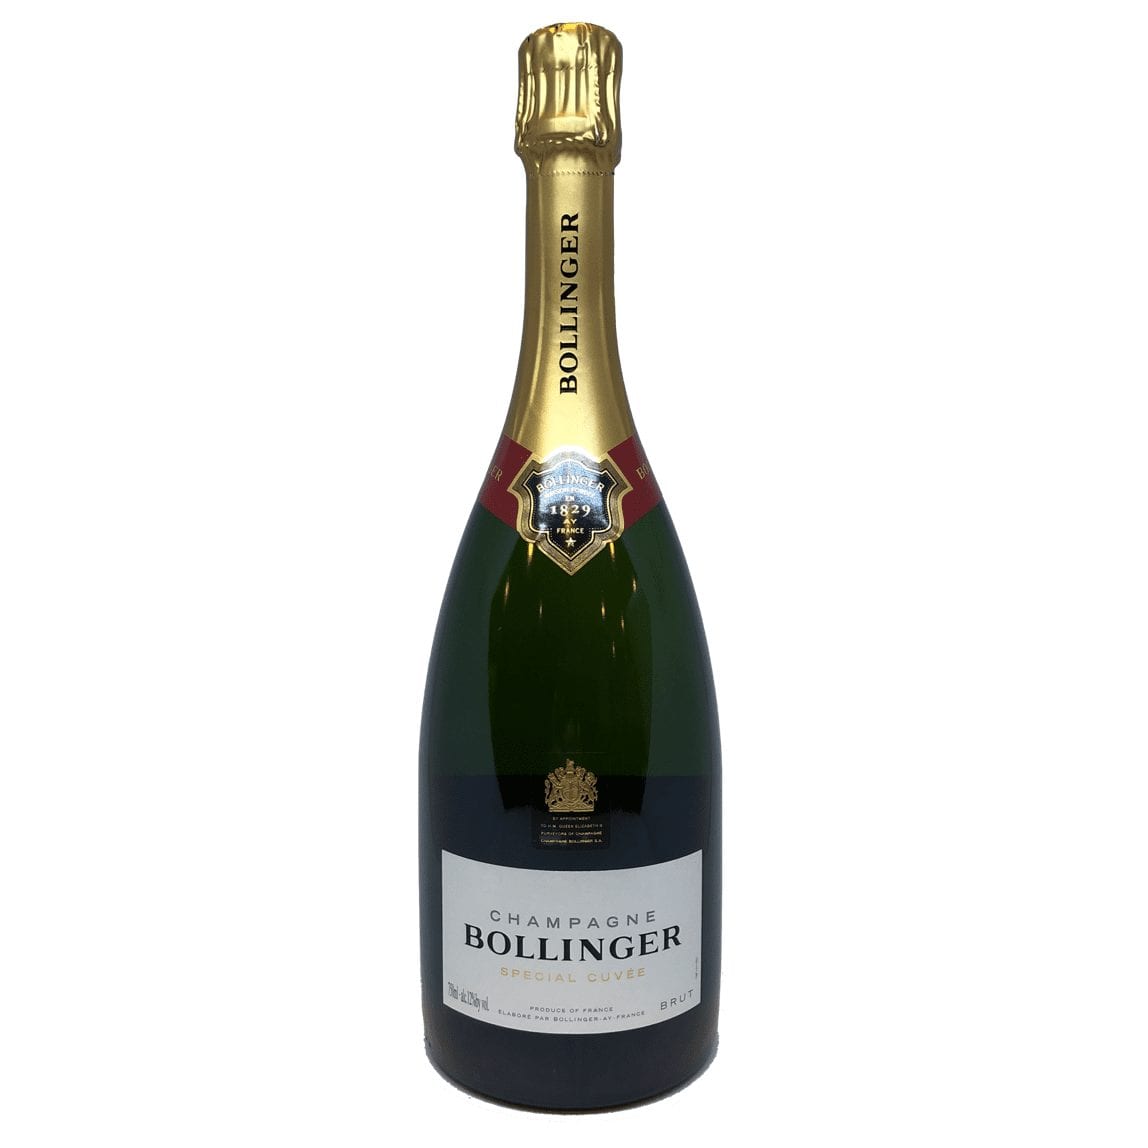 Brut Spirits Bollinger Champagne Special Colonial | Nv Cuvee